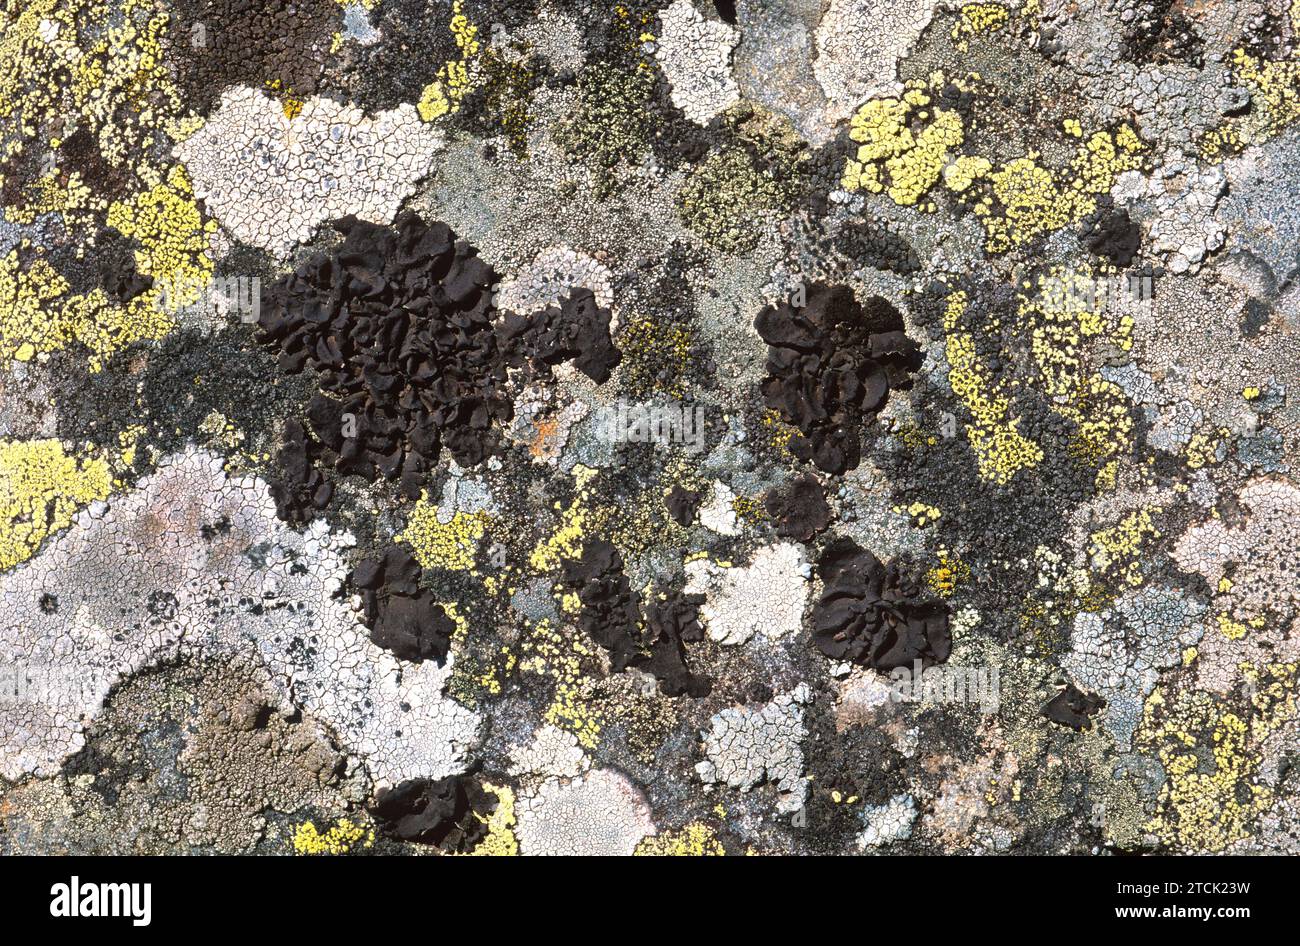 Umbilicaria polyphylla is a foliose lichen surrounded by differents species of crustose lichens growing on a siliceous rock. Stock Photo